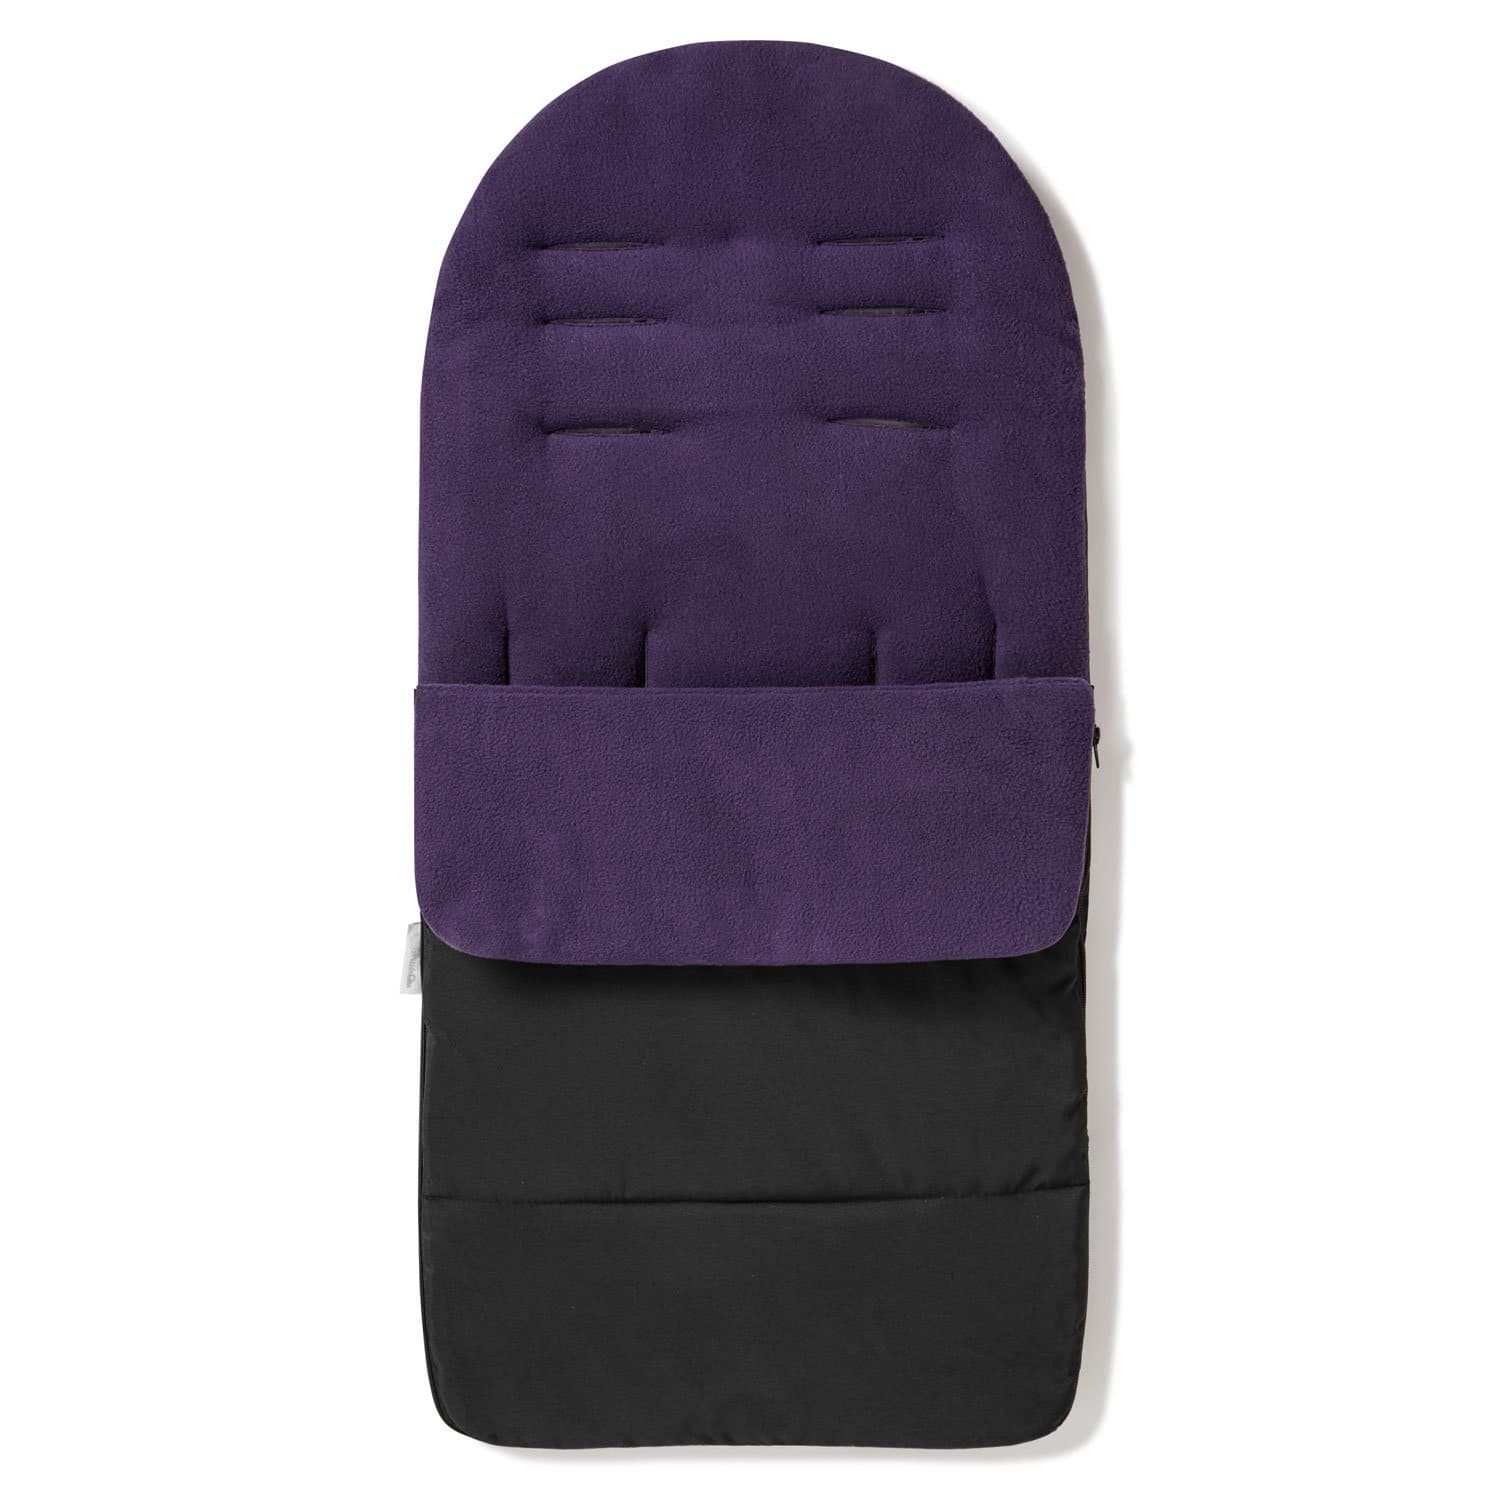 Premium Footmuff / Cosy Toes Compatible with Pericles - Plum Purple / Fits All Models | For Your Little One